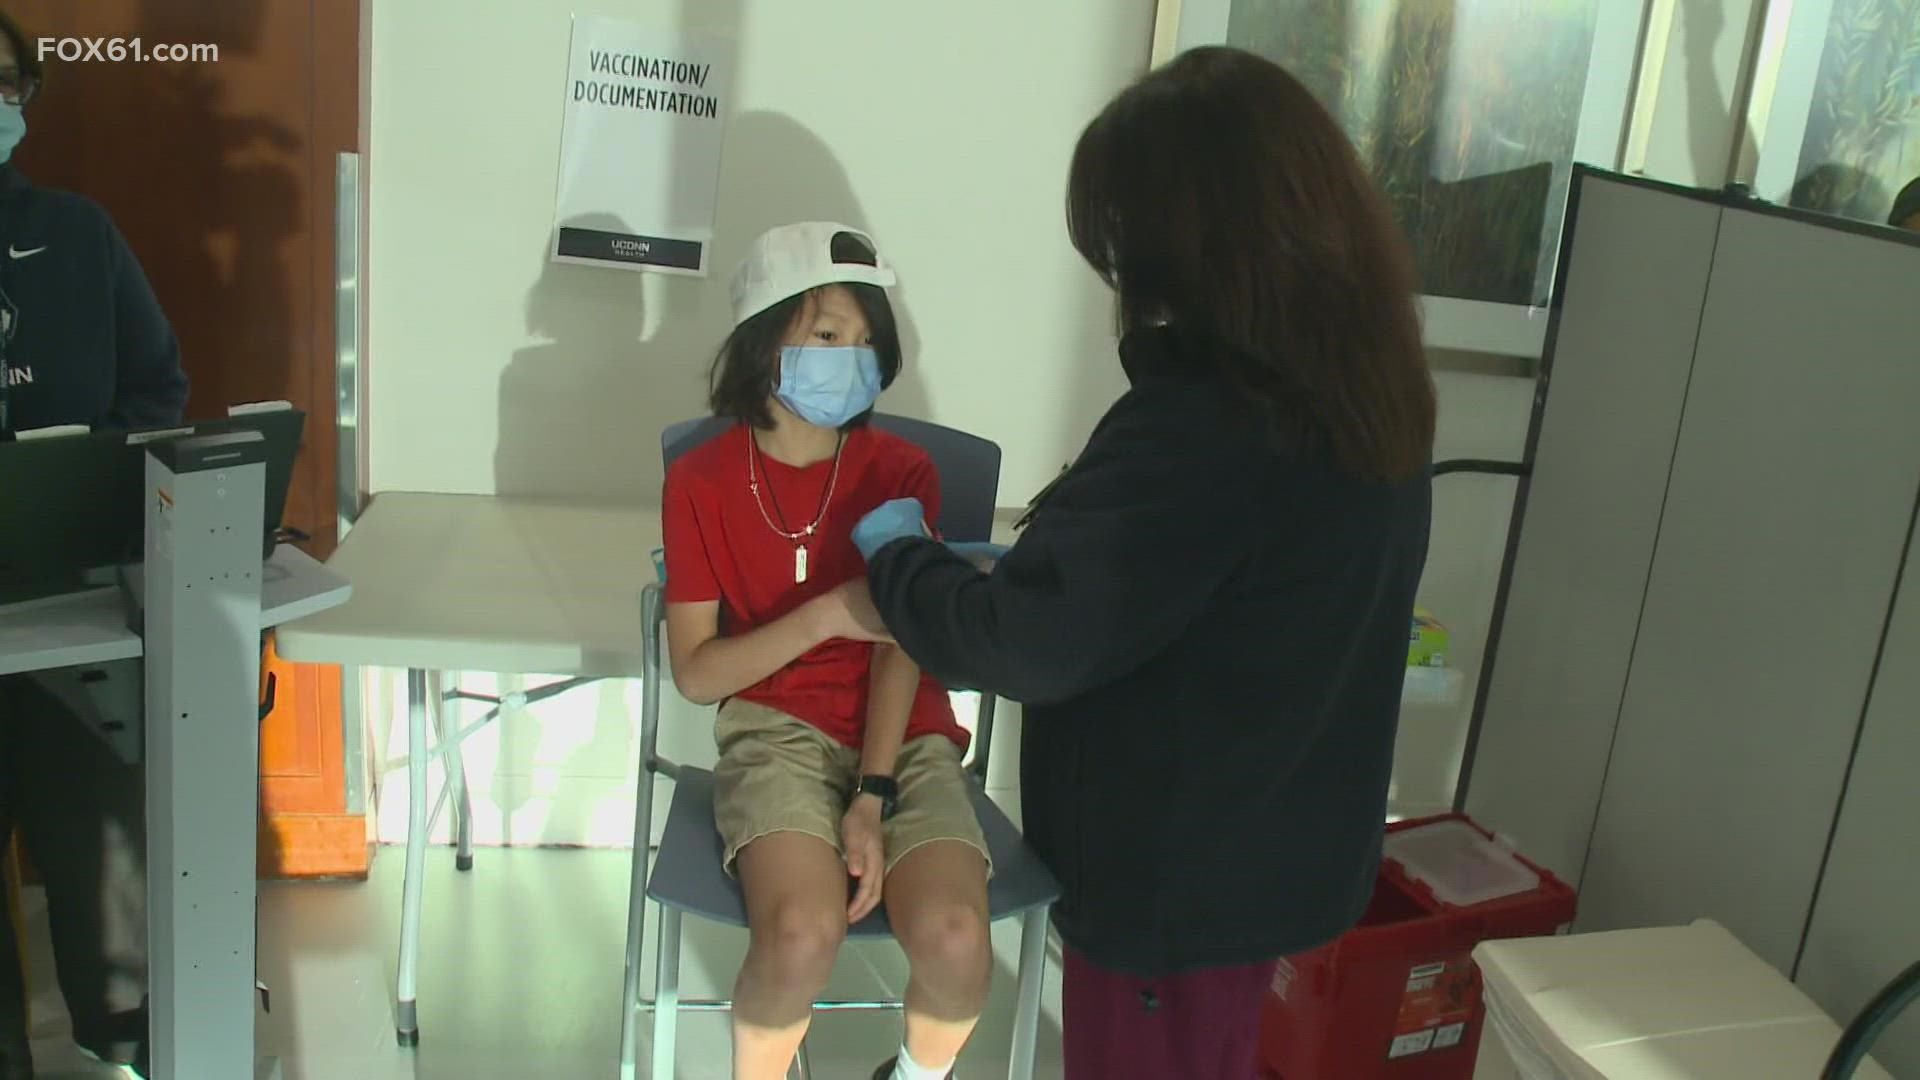 The organization held its first pediatric vaccination clinic on Thursday